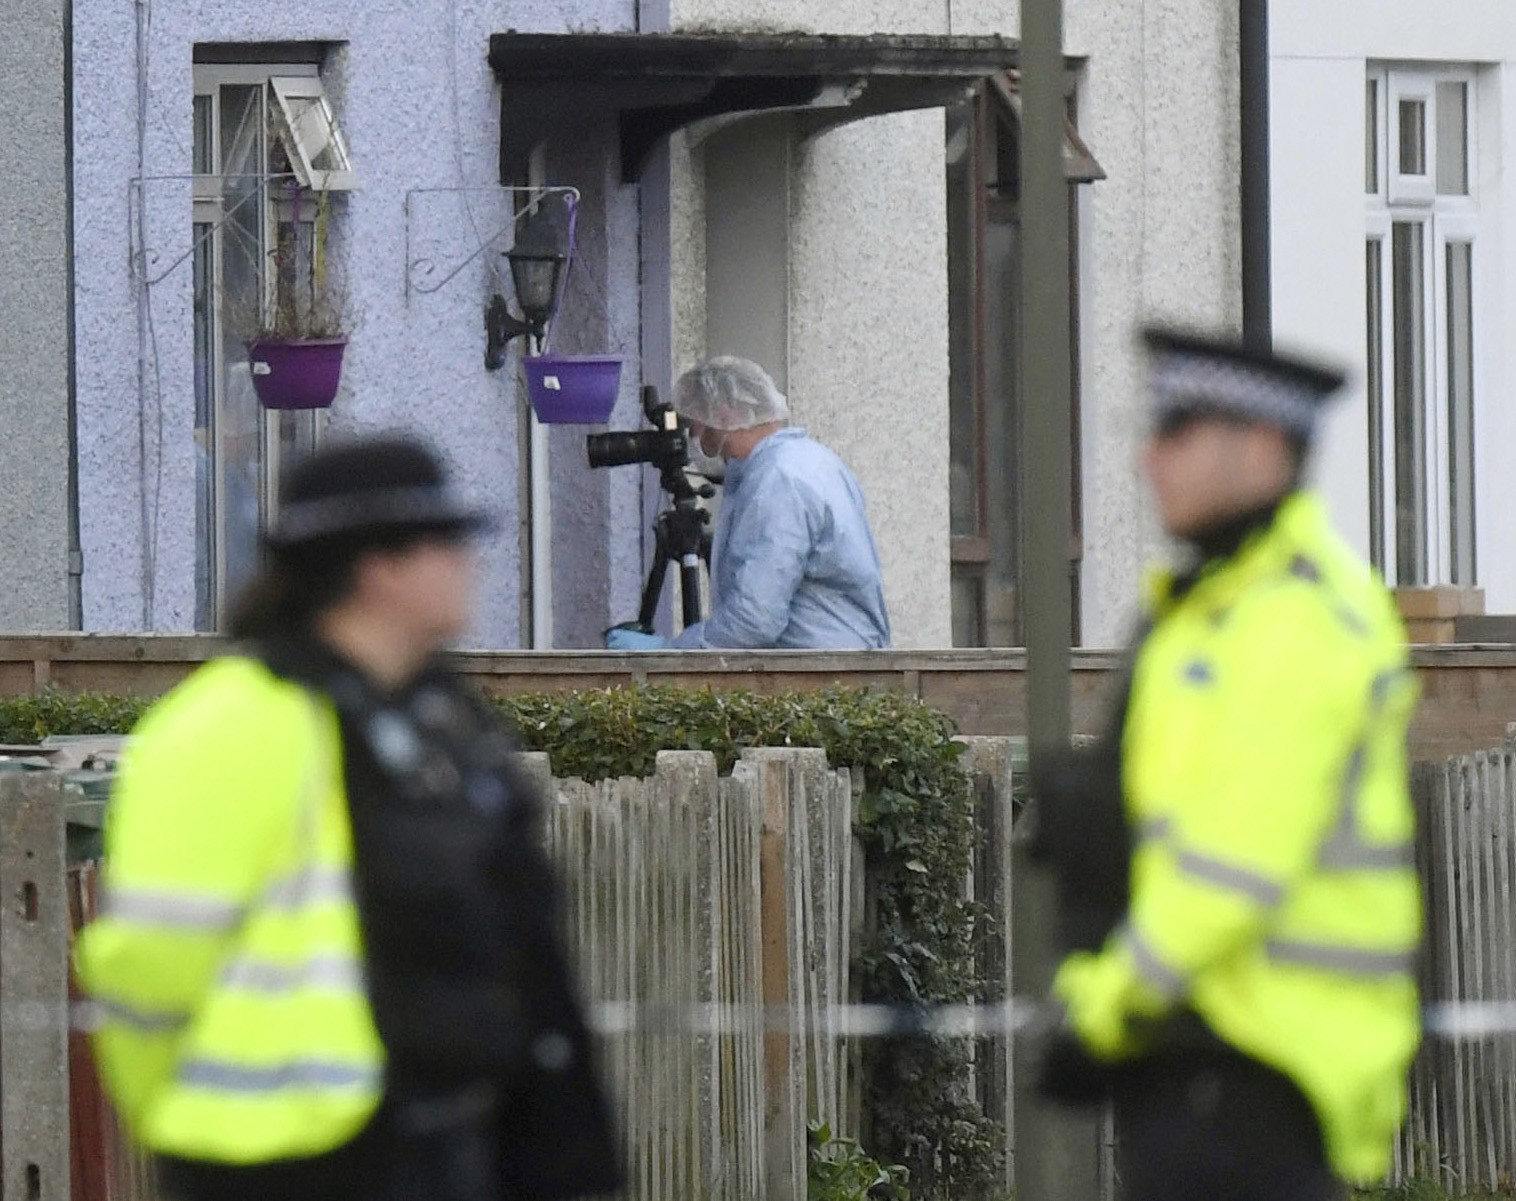 Police and forensic officers work at a property in Sunbury-on-Thames, southwest London, as part of the investigation into Friday's Parsons Green bombing. Photo: AP